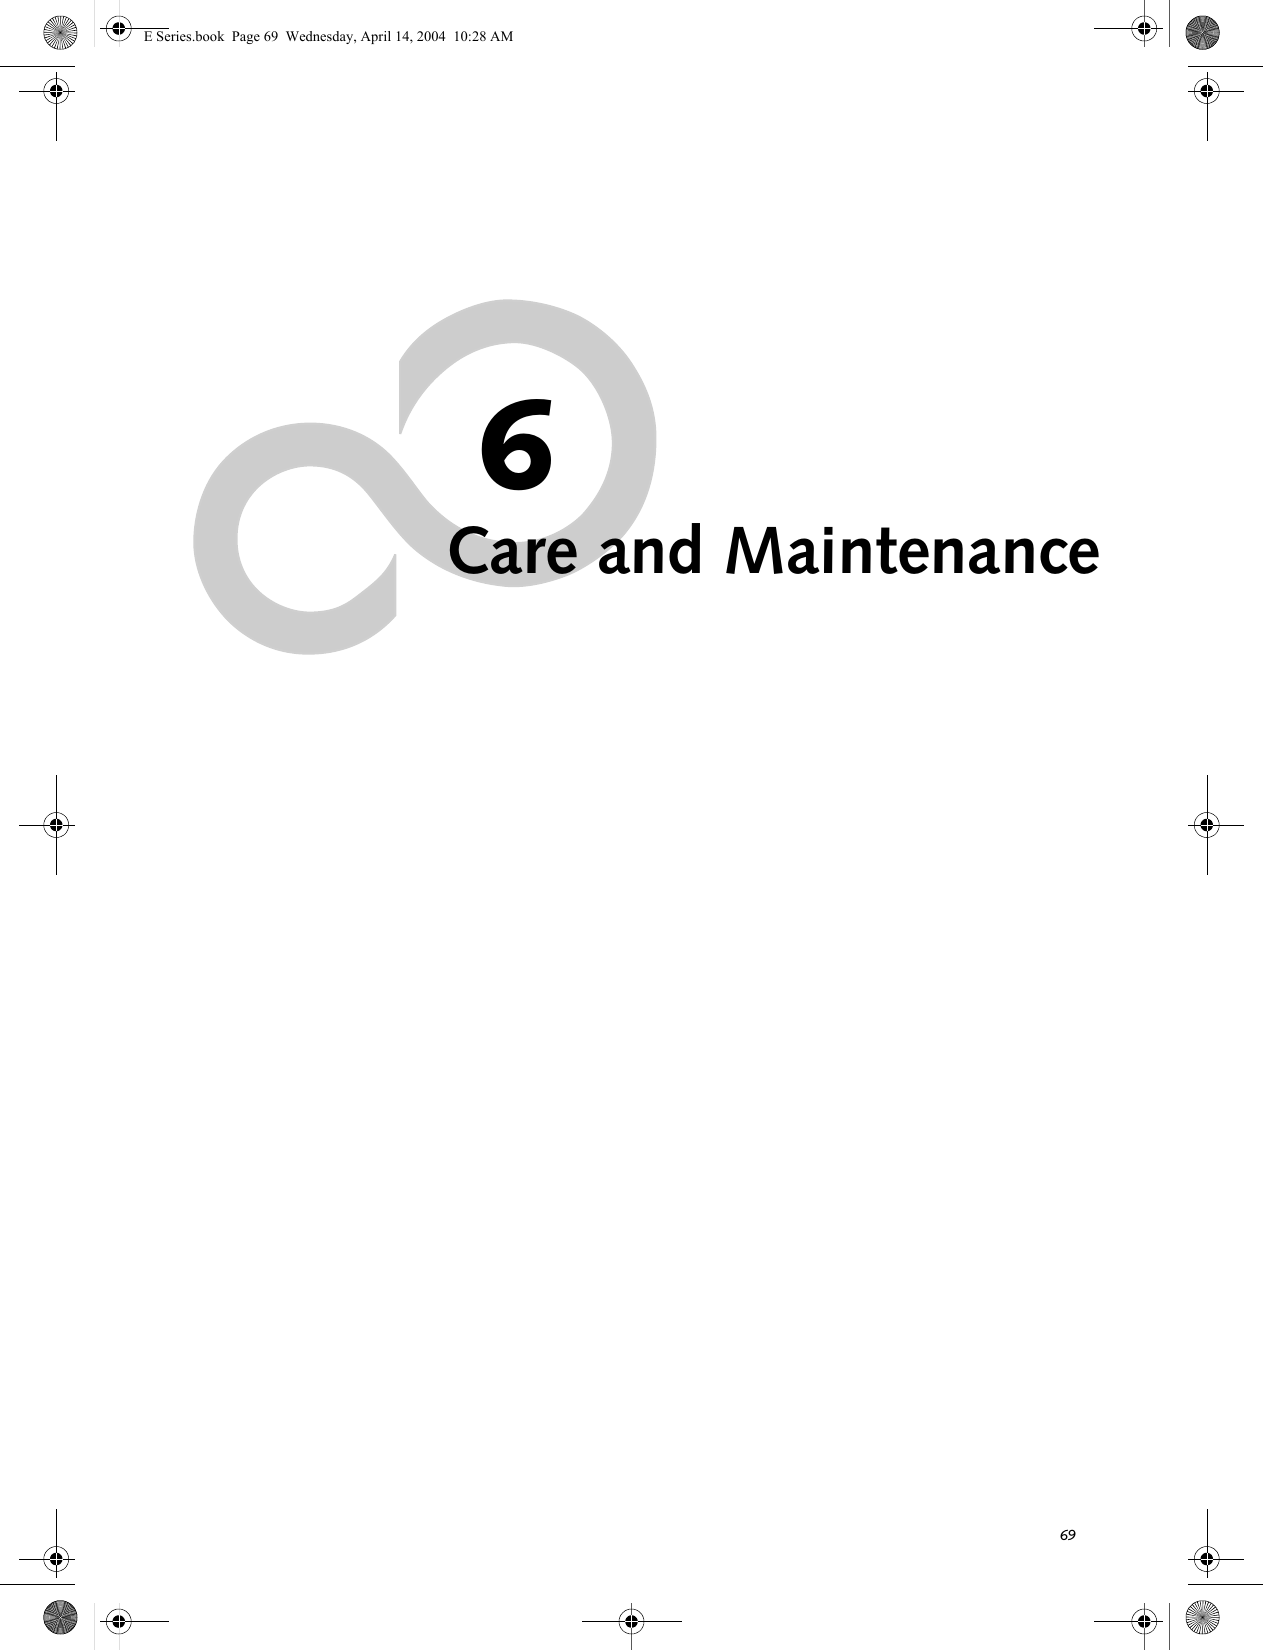 696Care and MaintenanceE Series.book  Page 69  Wednesday, April 14, 2004  10:28 AM